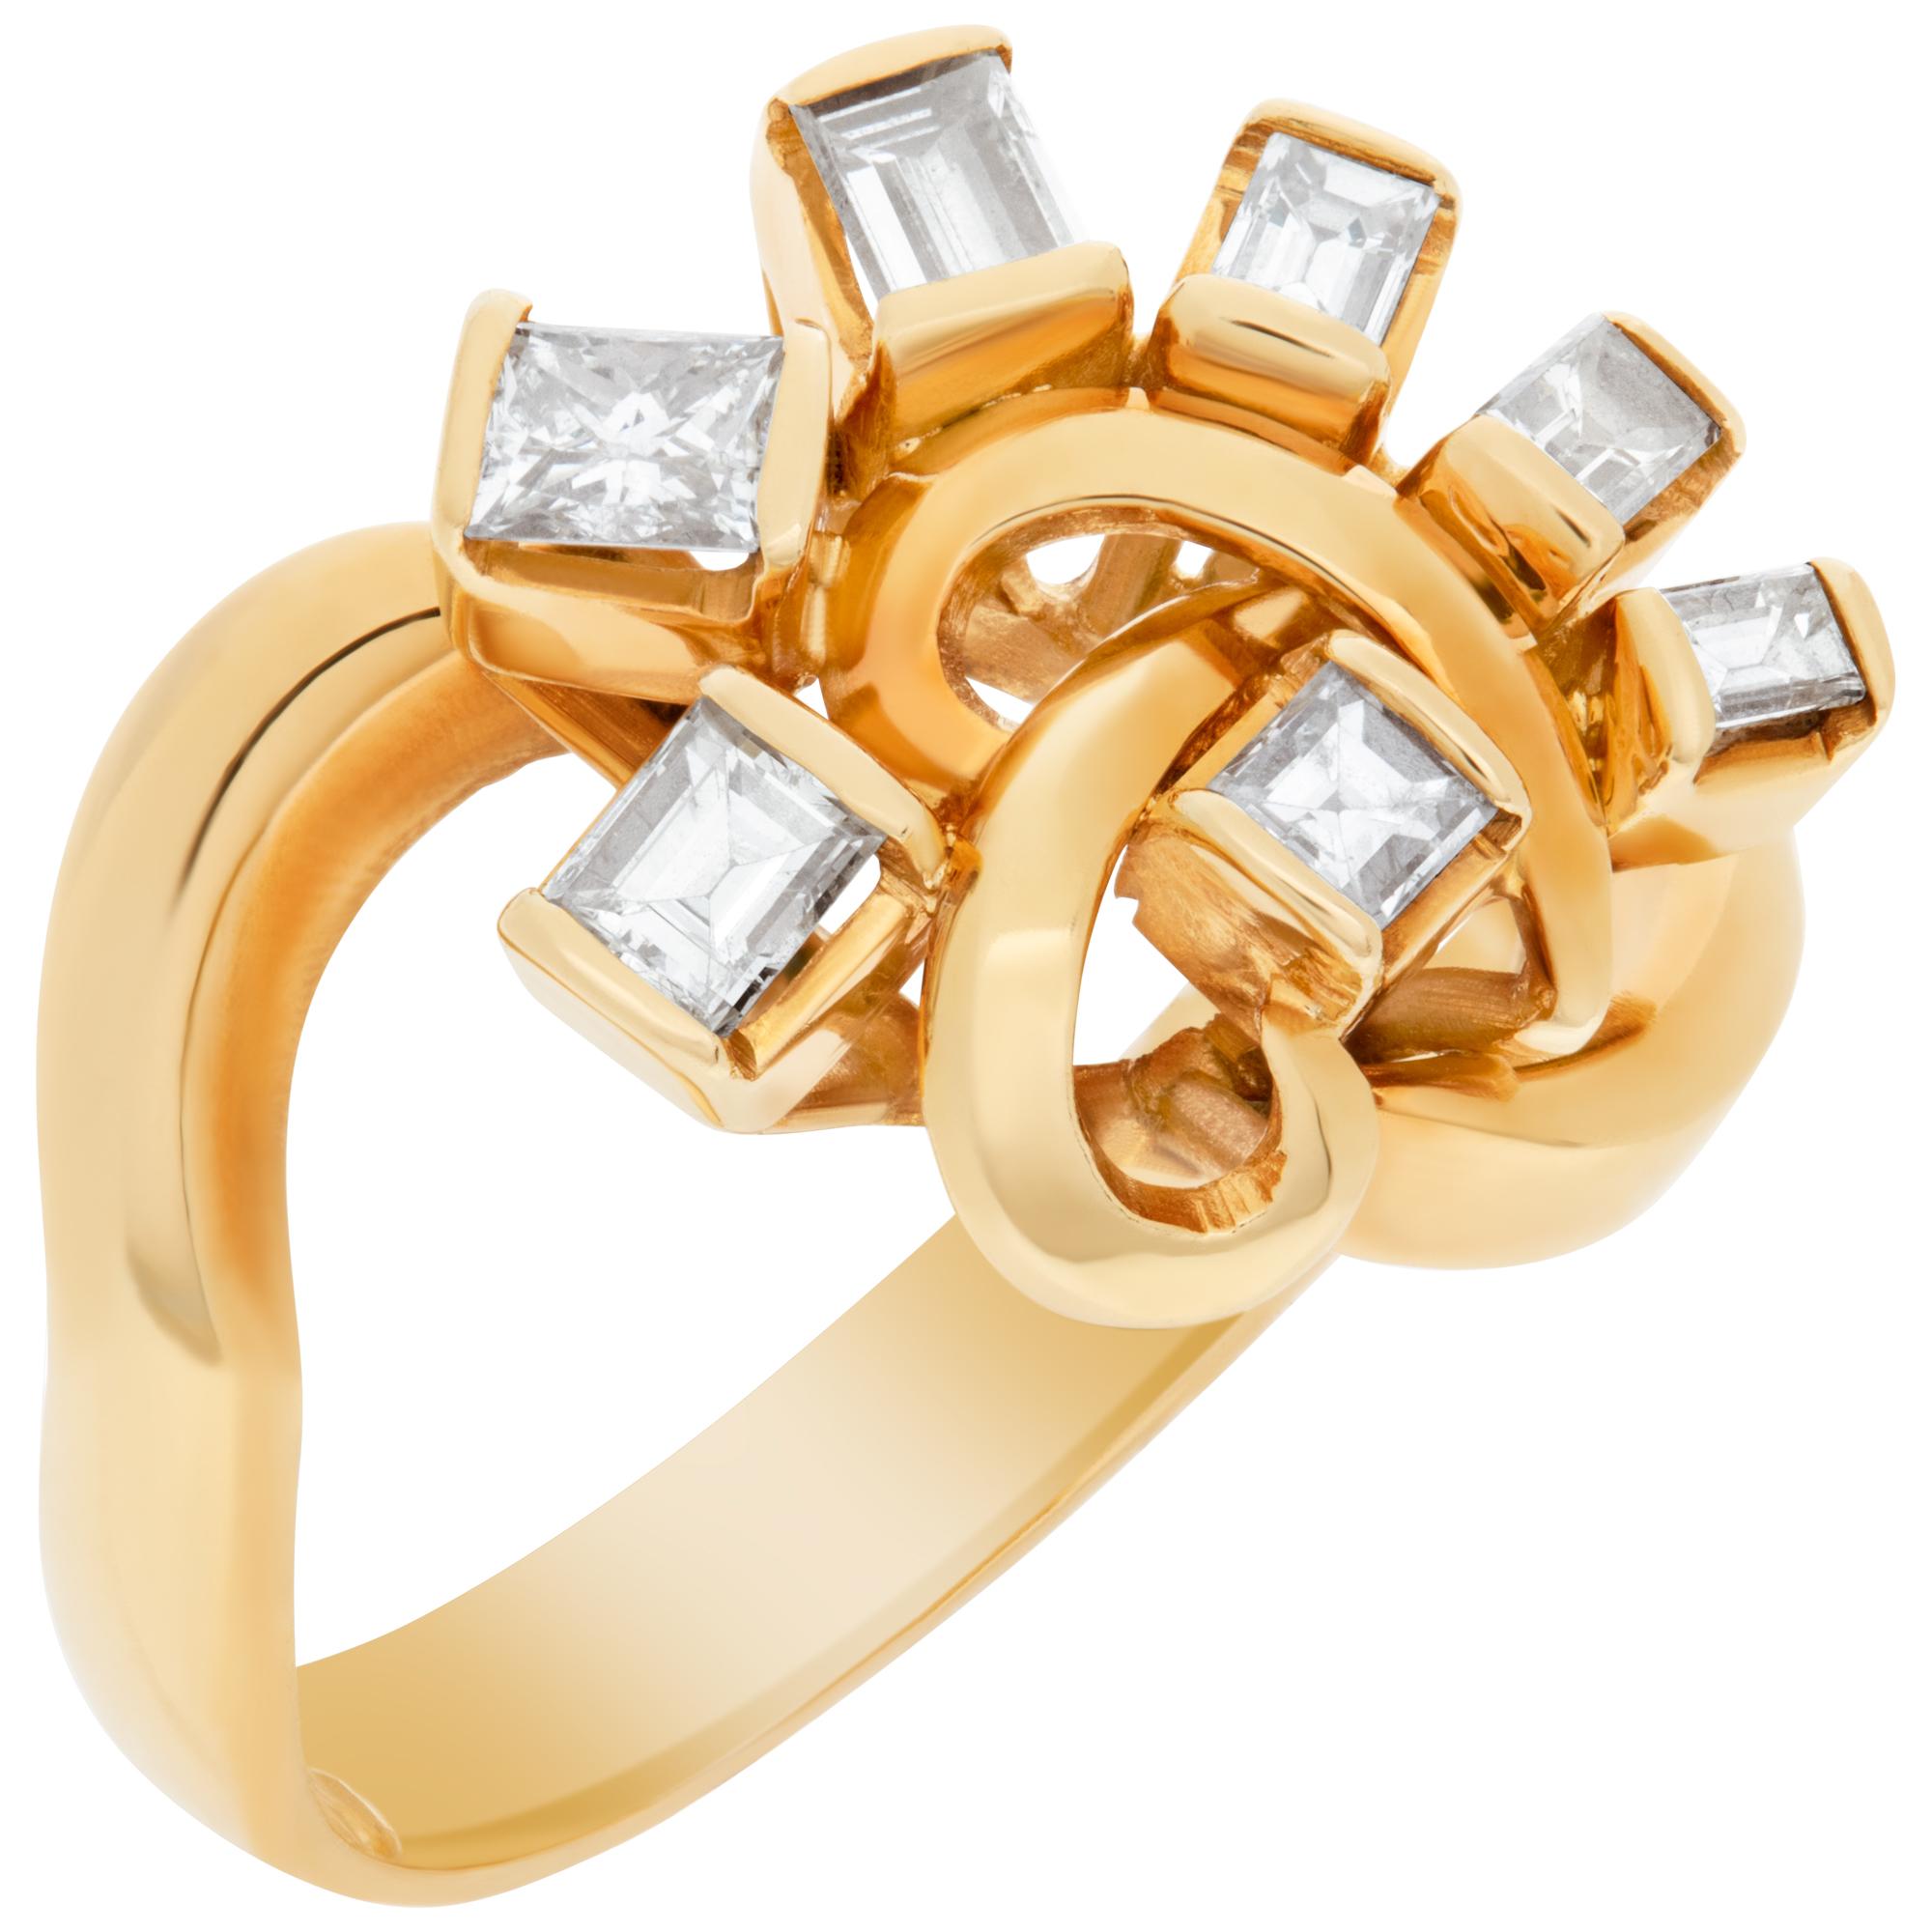 Swirl ring with diamonds set in 18k yellow gold In Excellent Condition For Sale In Surfside, FL